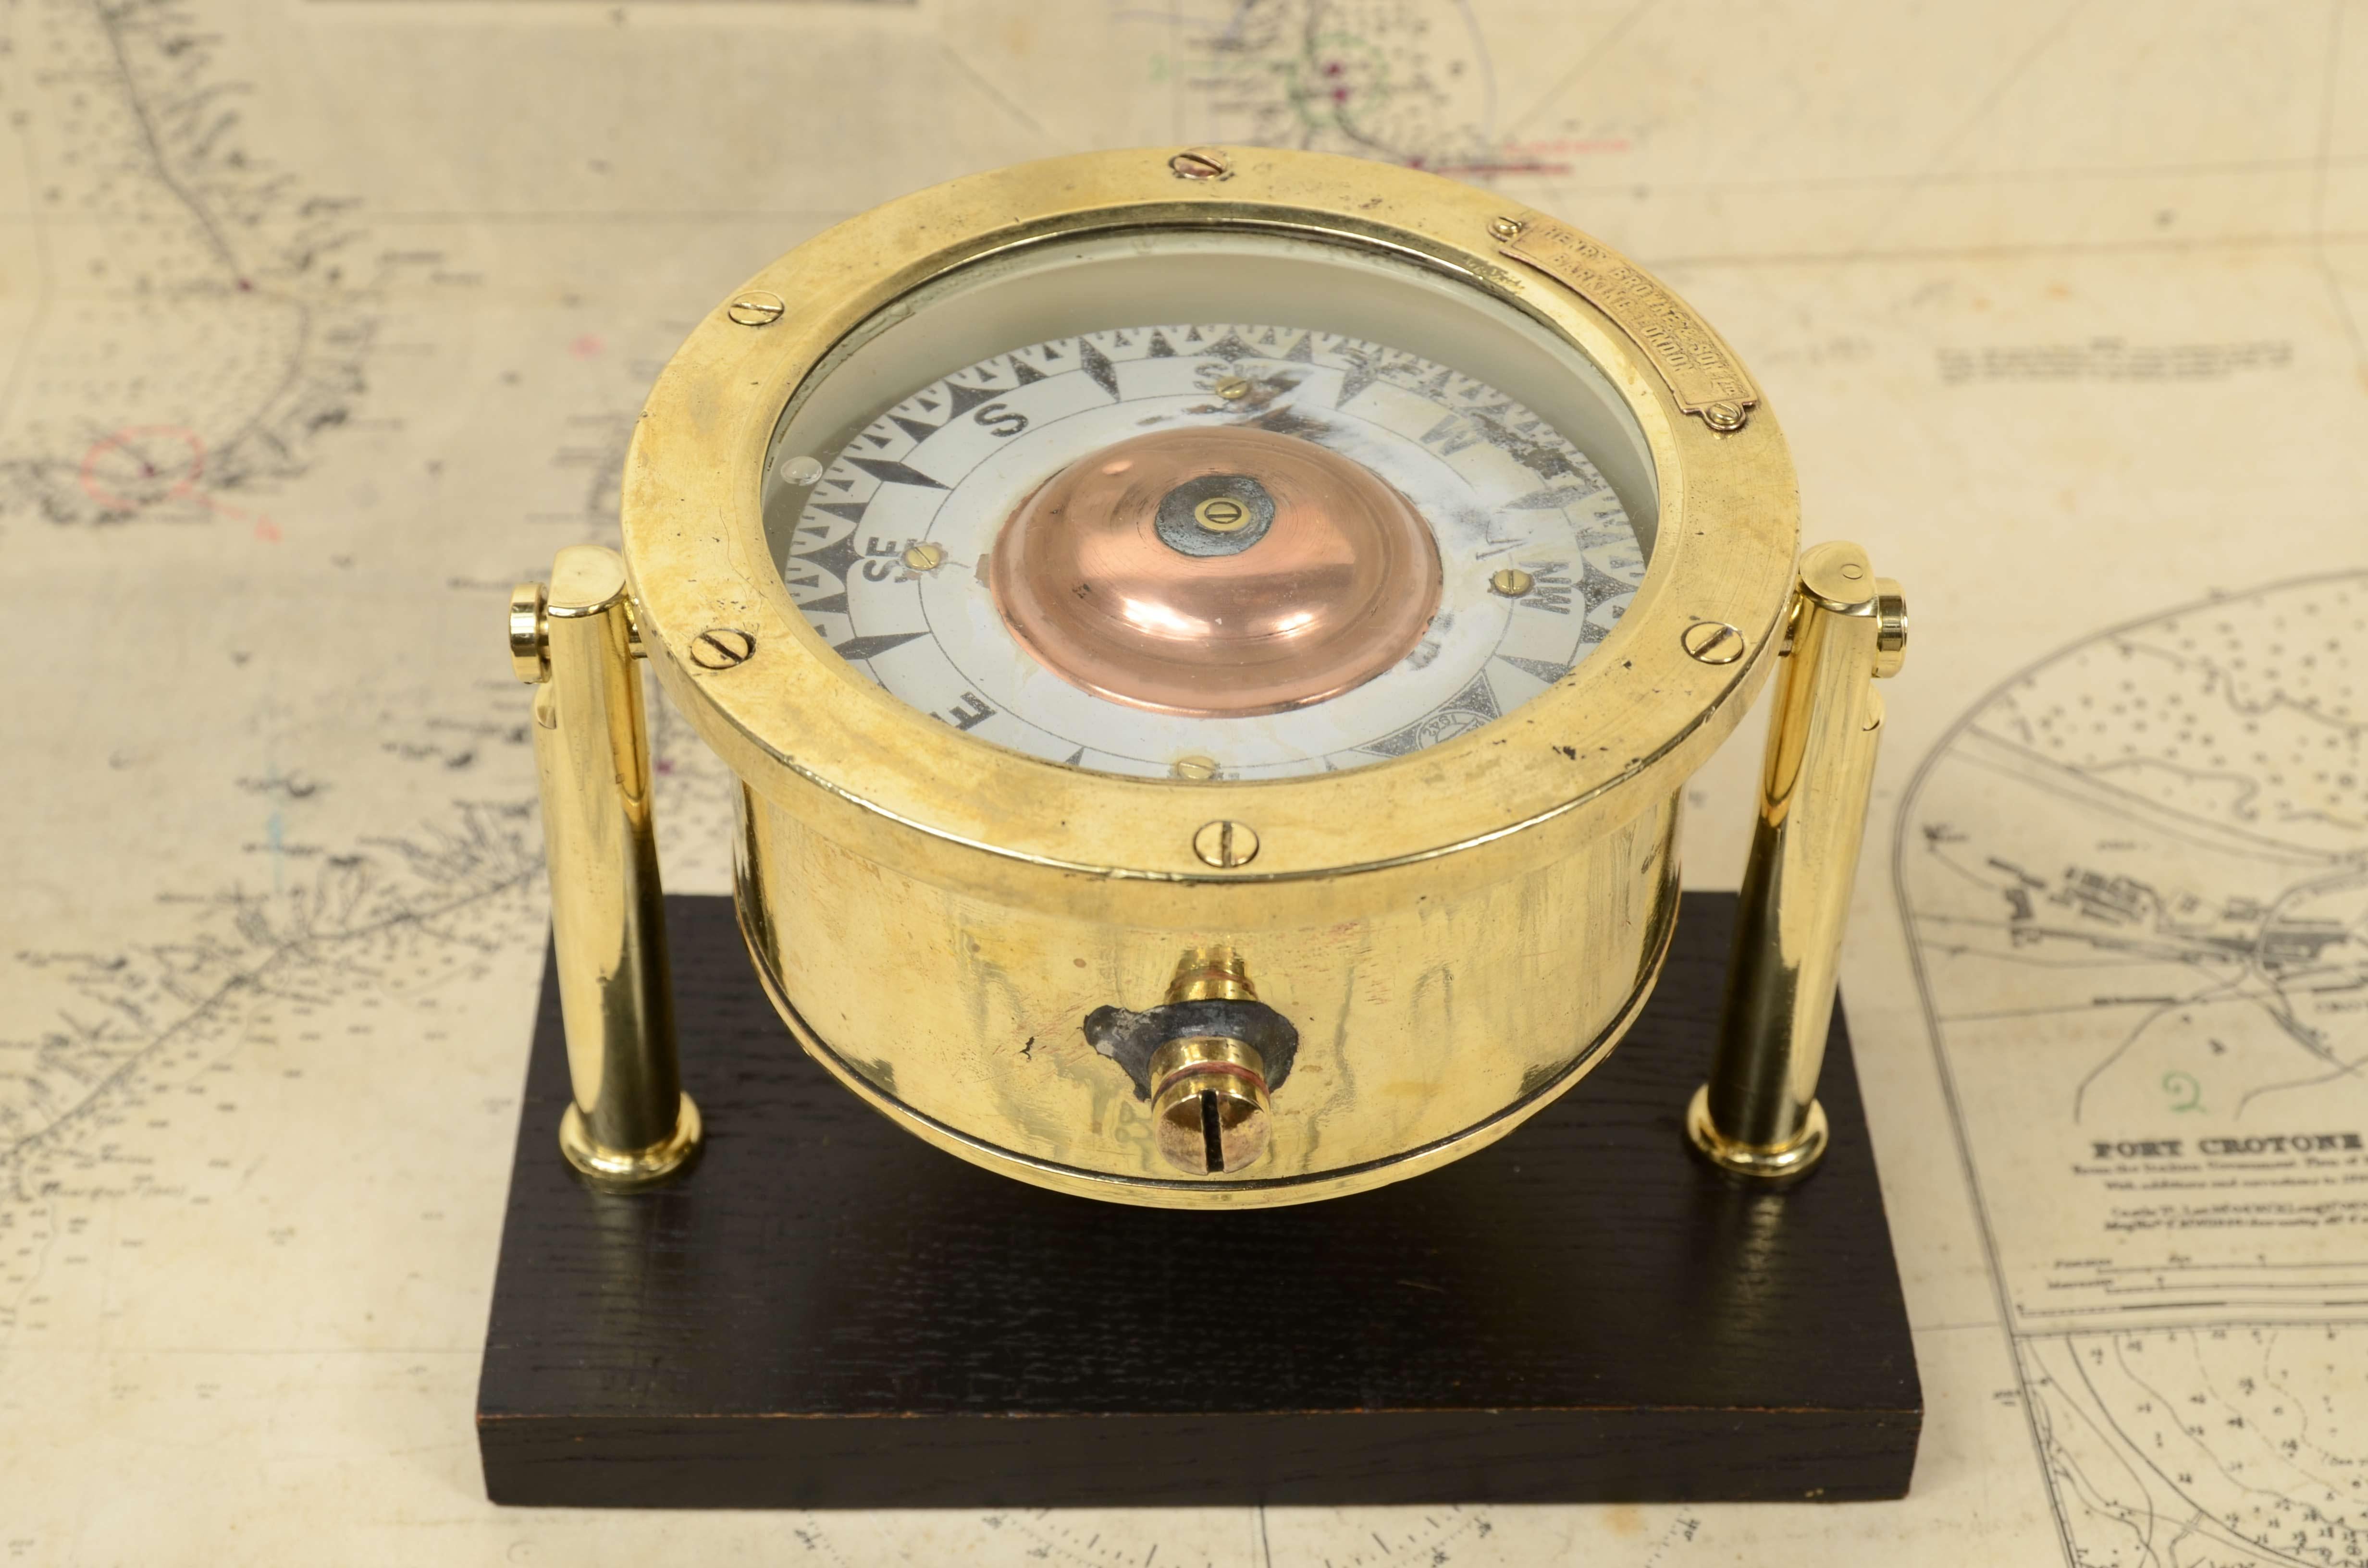 Nautical magnetic compass, signed by Henry Browne & Son Ltd   Sestrel  1942, Barking & London  1942. Good  condition, slight abrasion on compass rose. The compass is mounted on ebonized wooden board  and custom-made reelized brass. 
Compass diameter